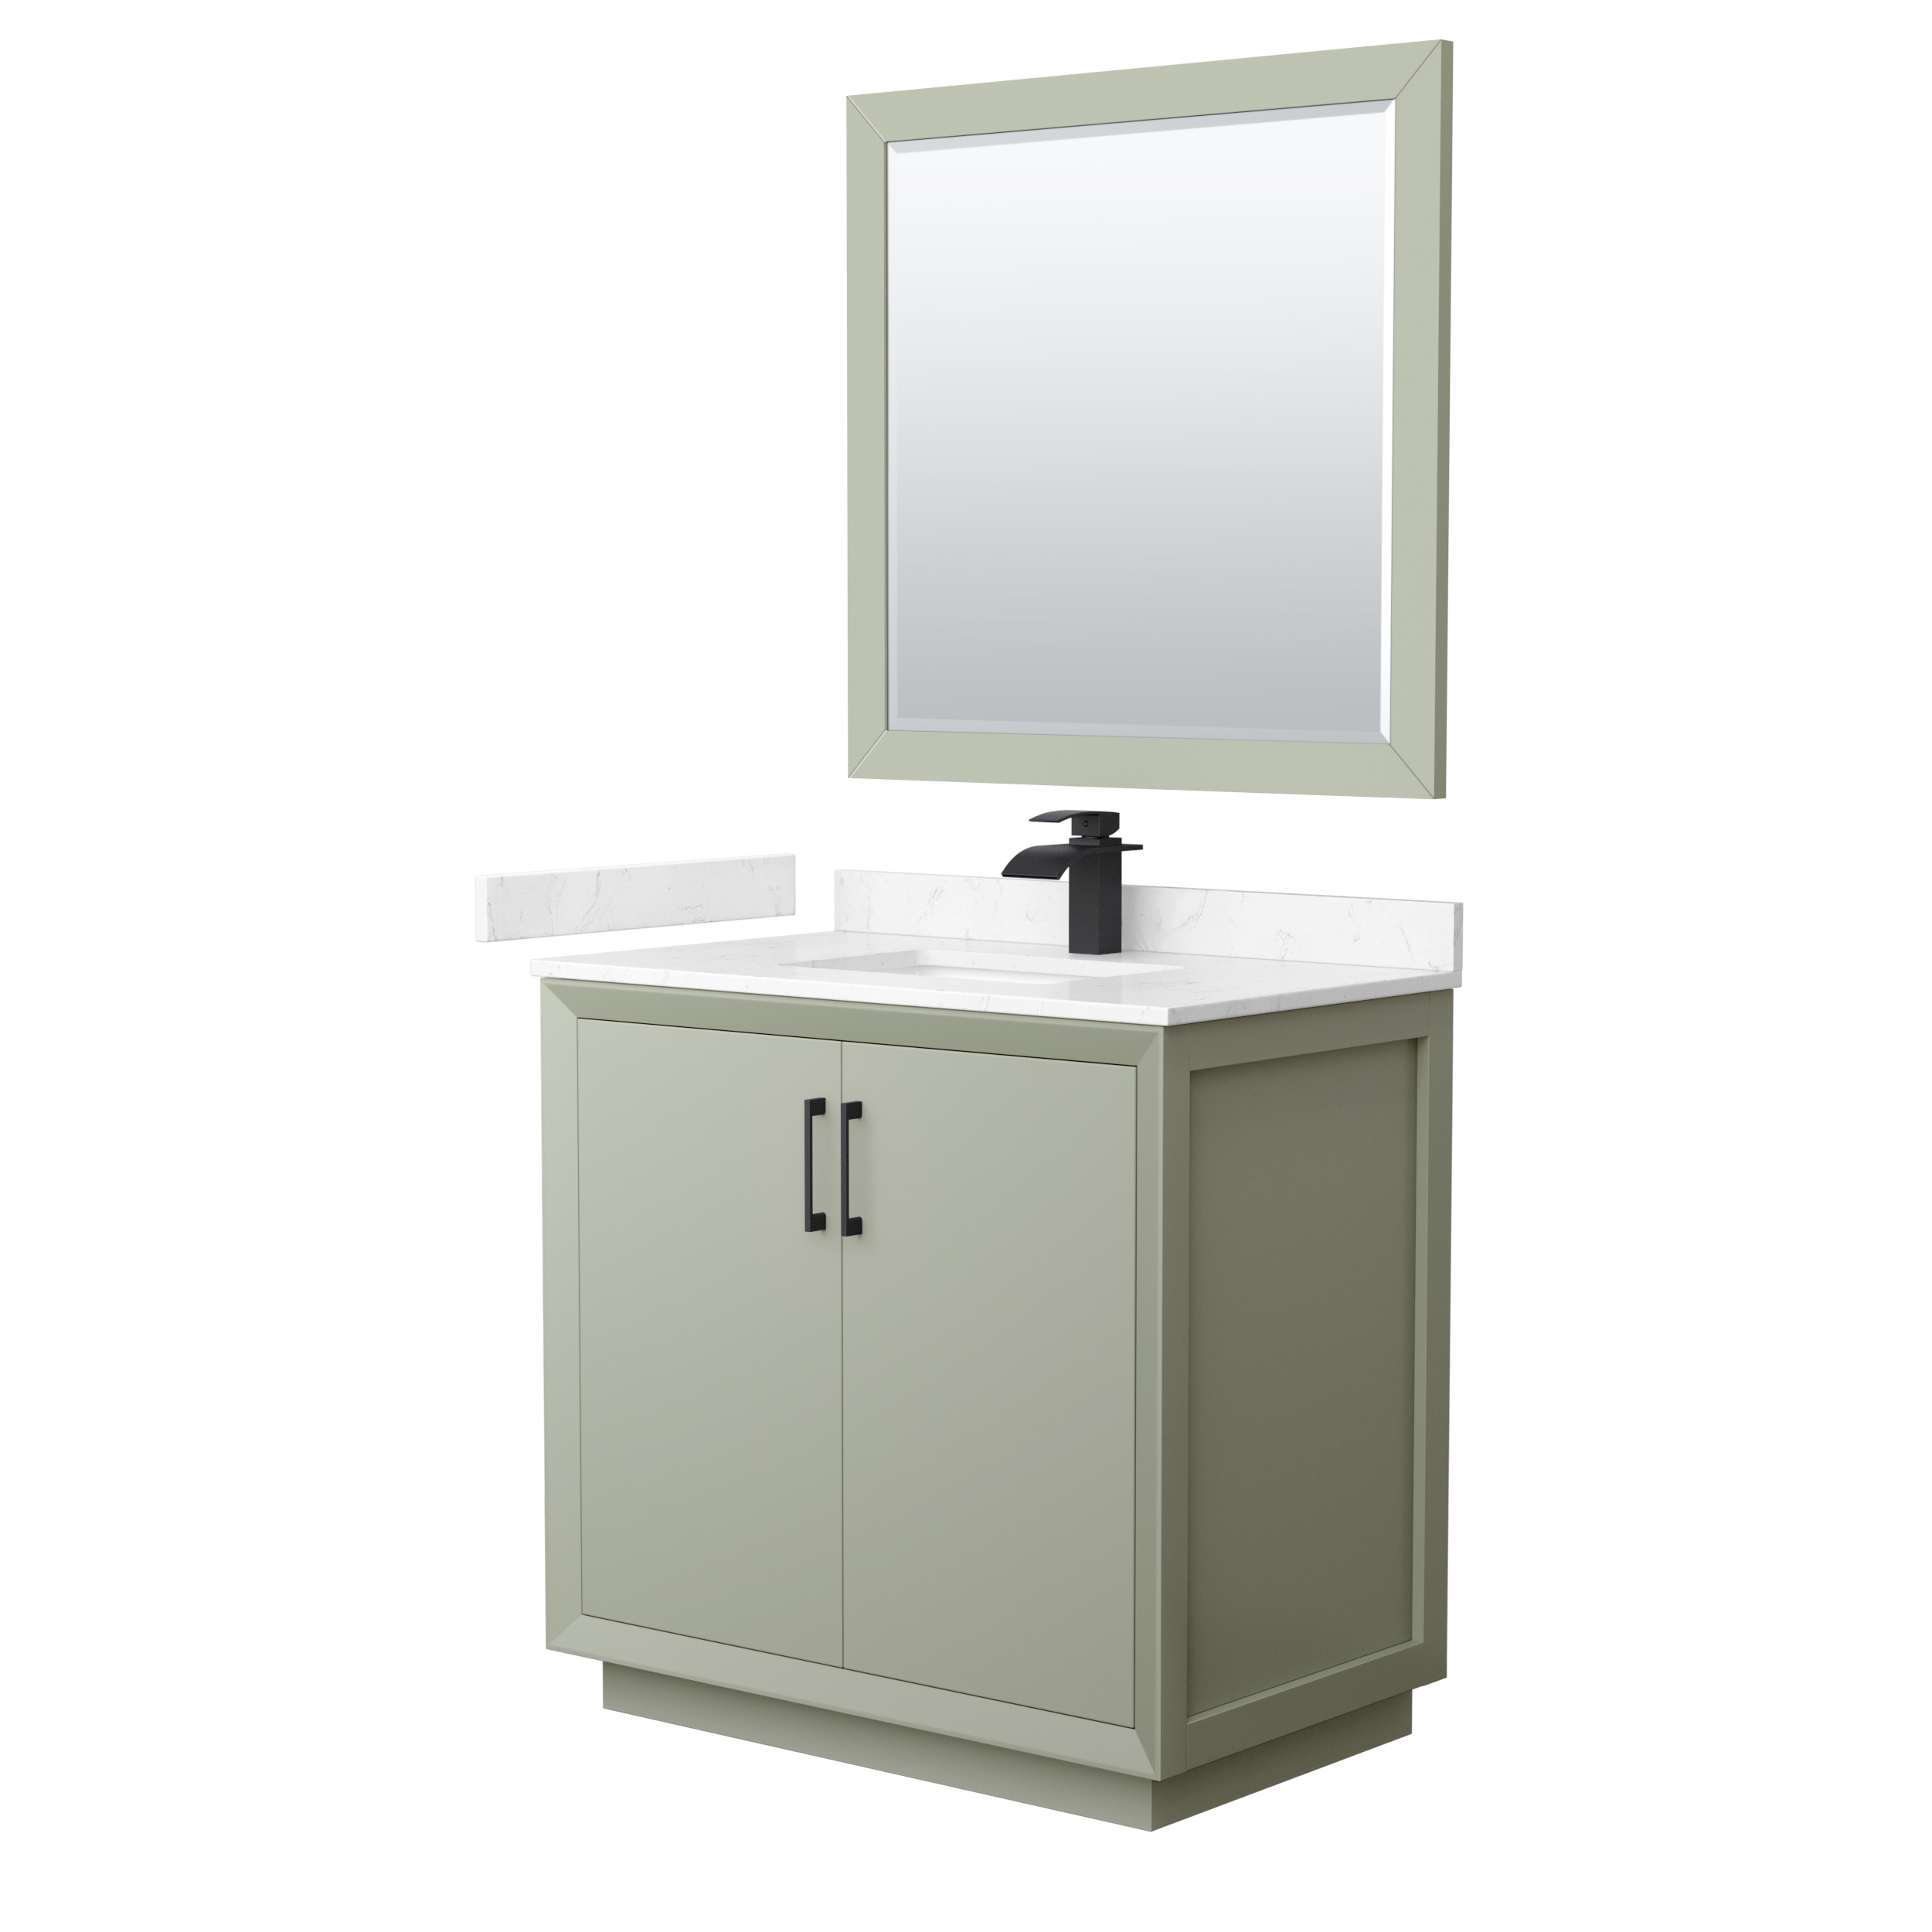 36" Transitional Single Vanity Base in Light Green, 3 Top Option with 3 Hardware Options and Mirror Option